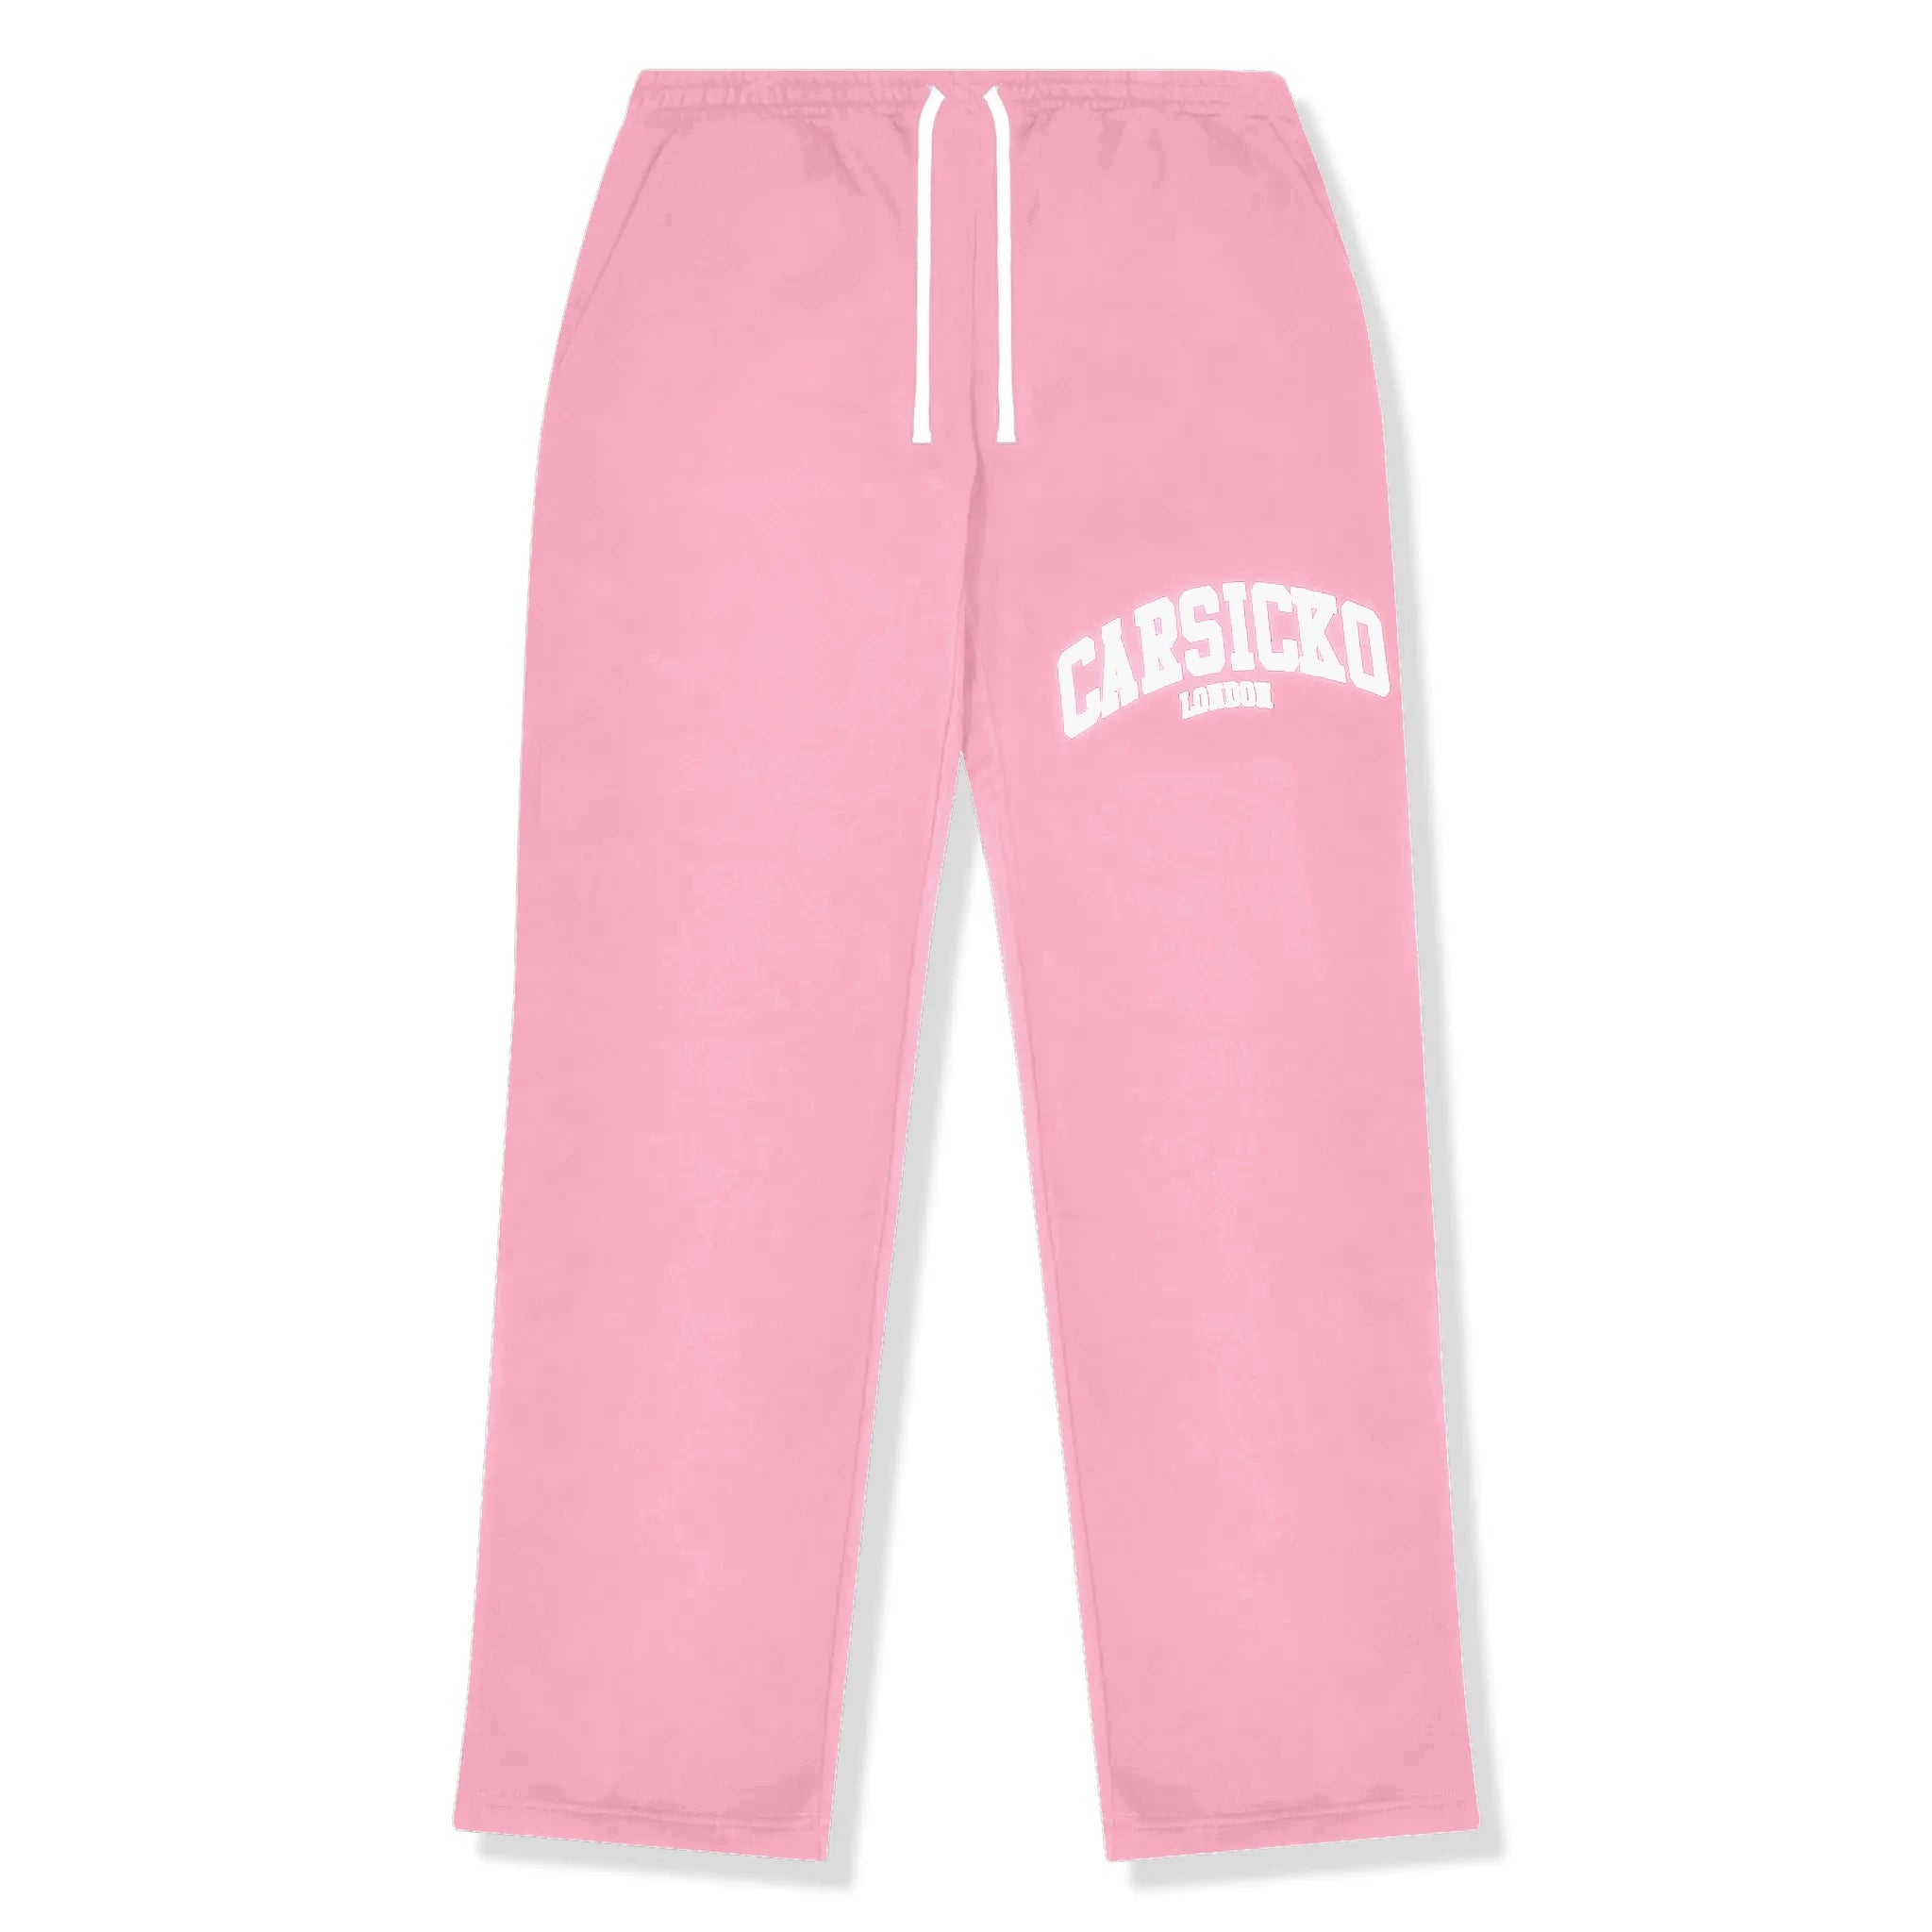 Front view of Carsicko London Pink Track Pants